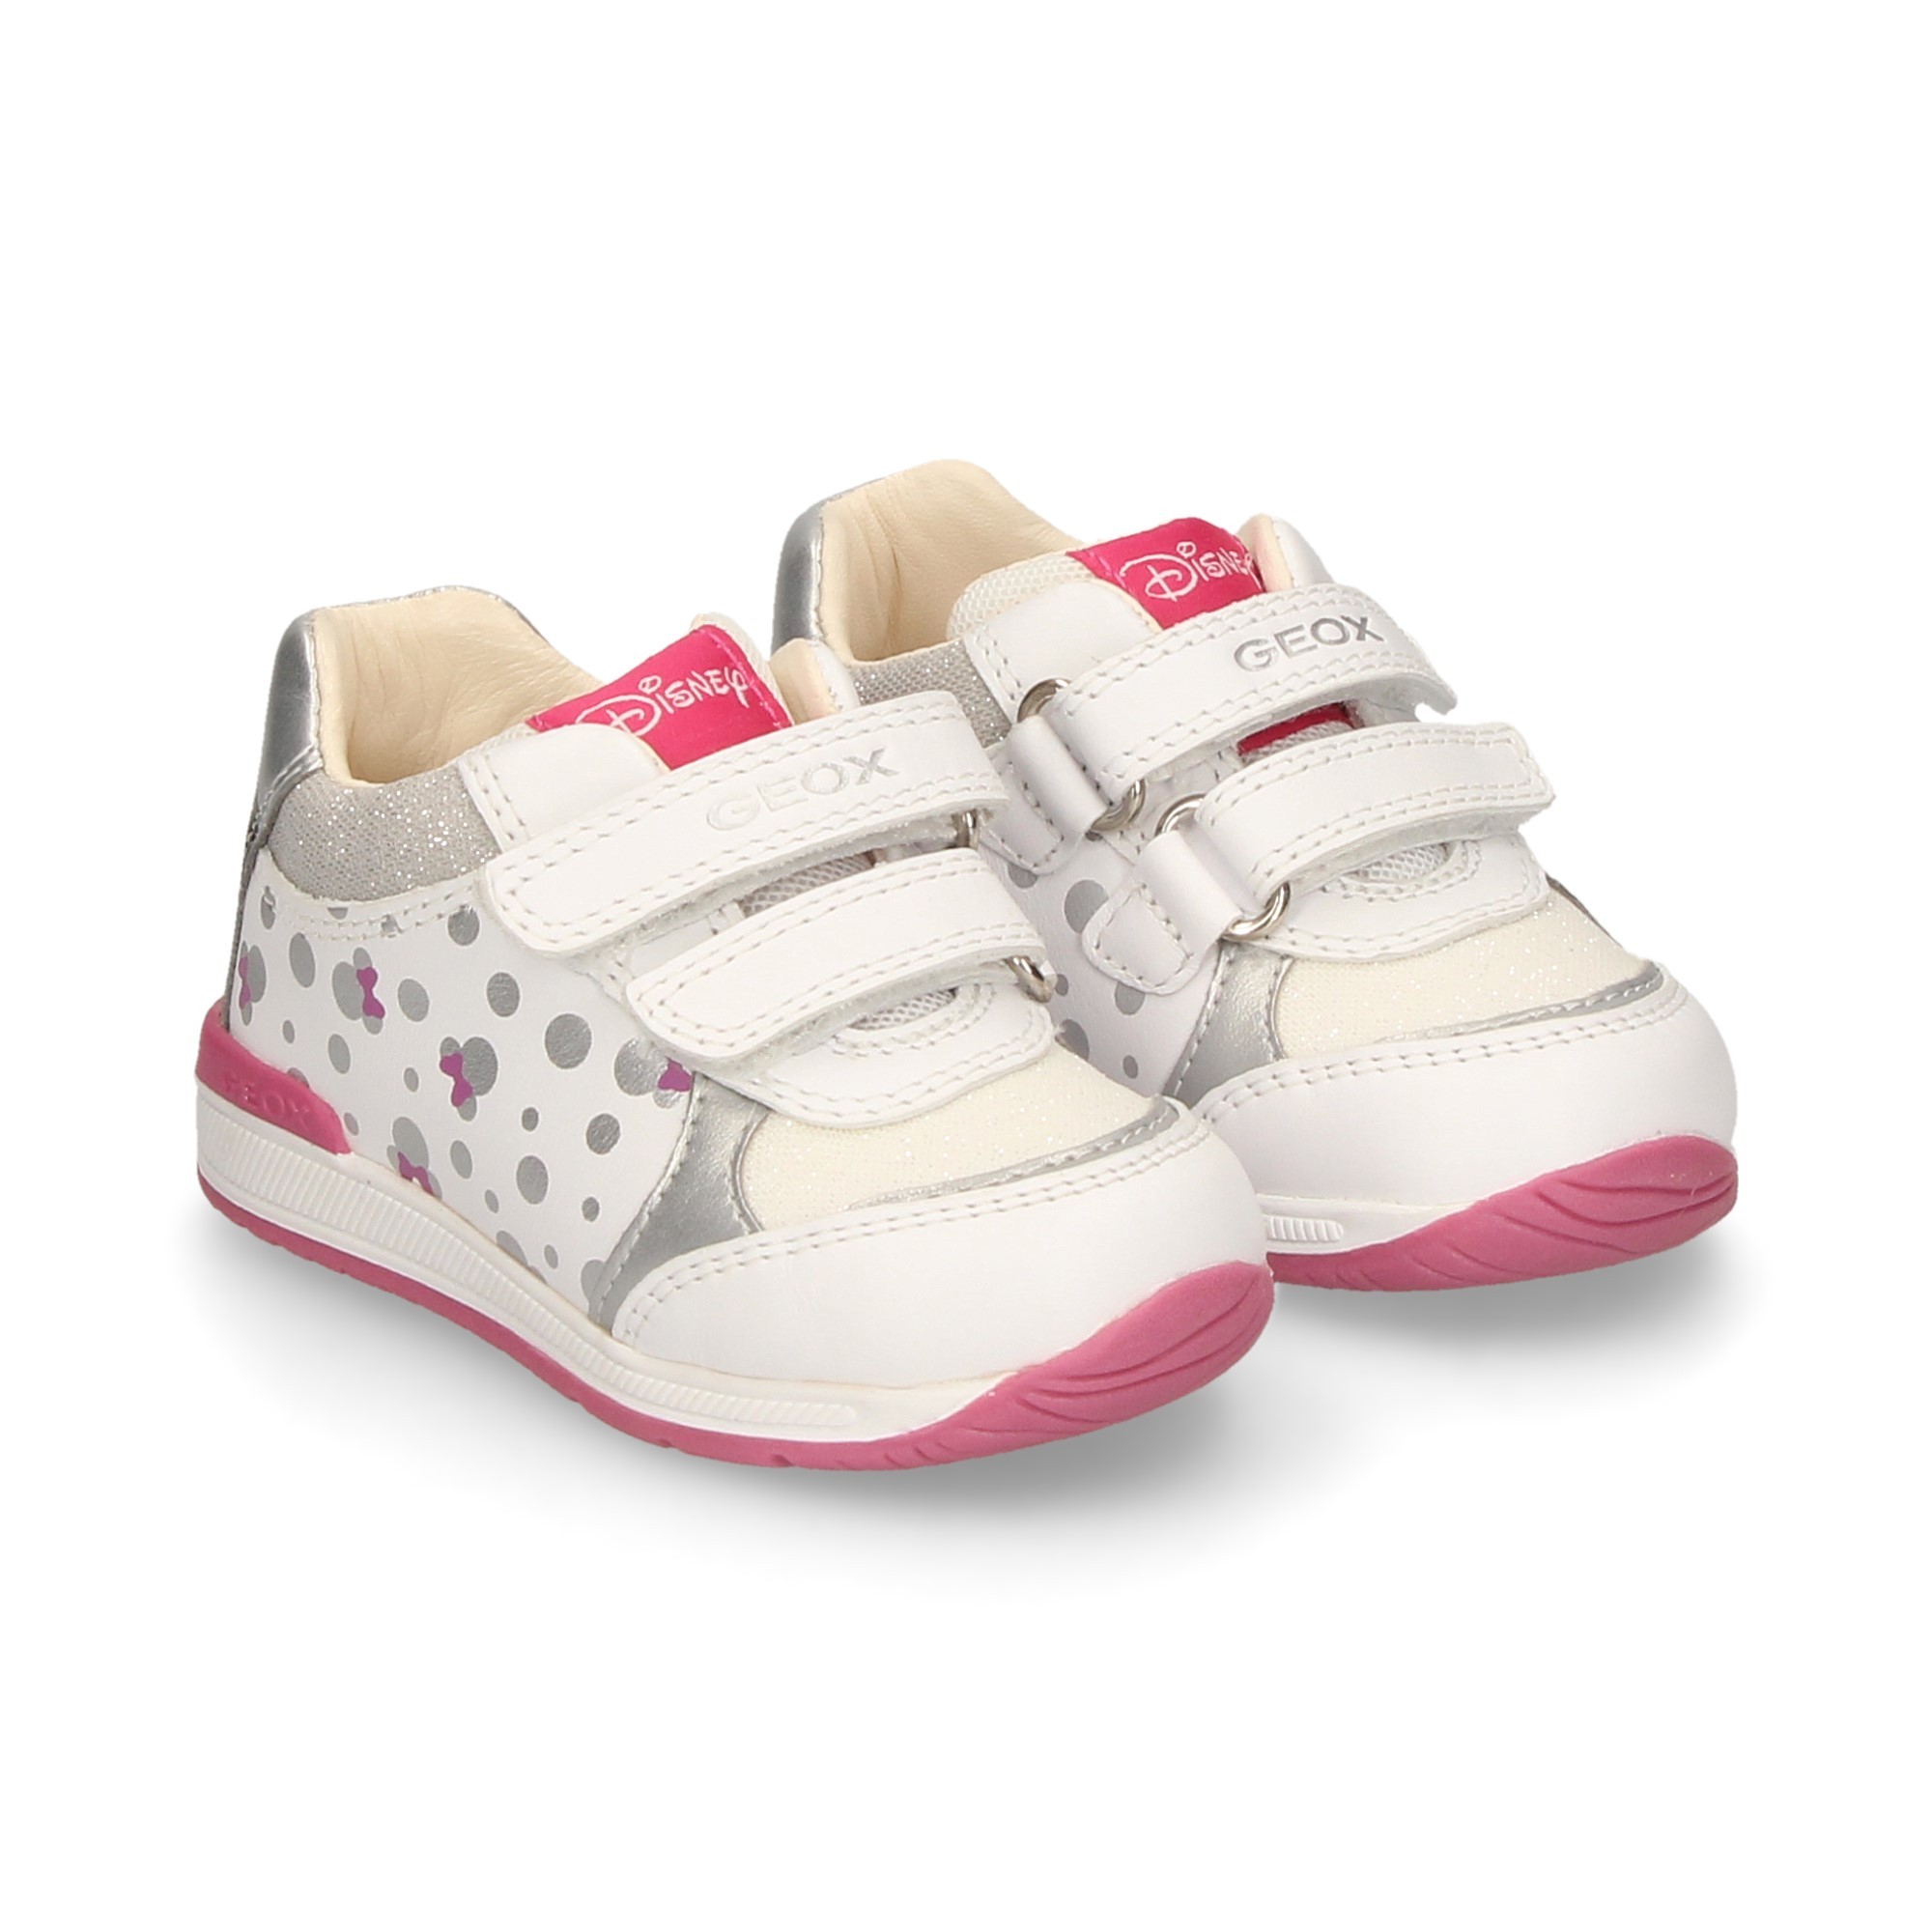 GEOX Girls sneakers B020LC WHTE/SILV